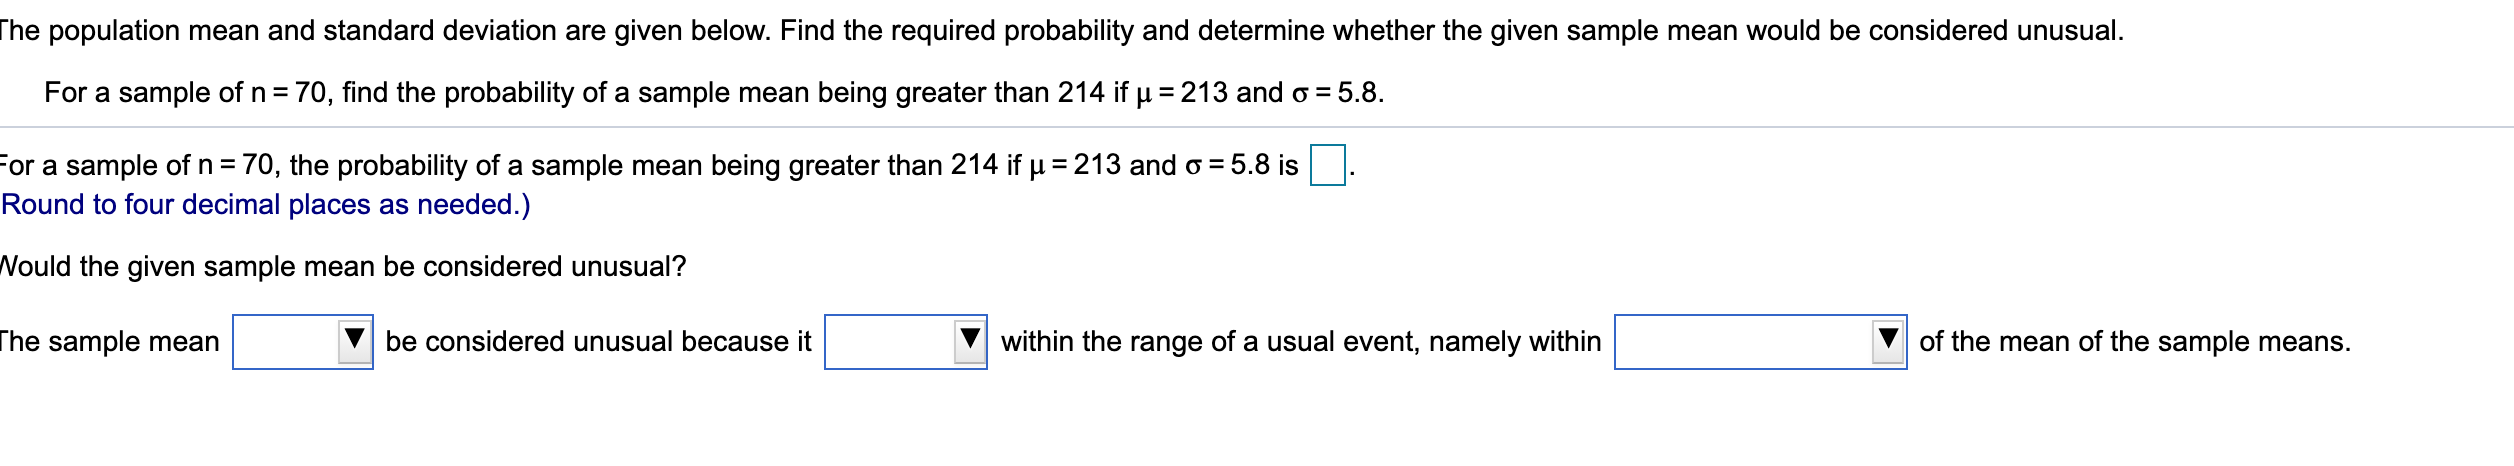 he population mean and standard deviation are given below. Find the required probability and determine whether the given sample mean would be considered unusual.
For a sample of n = 70, find the probability of a sample mean being greater than 214 if µ = 213 and o = 5.8.
For a sample of n= 70, the probability of a sample mean being greater than 214 if µ = 213 and o = 5.8 is
Round to four decimal places as needed.)
%3D
Vould the given sample mean be considered unusual?
he sample mean
be considered unusual because it
within the range of a usual event, namely within
of the mean of the sample means.
